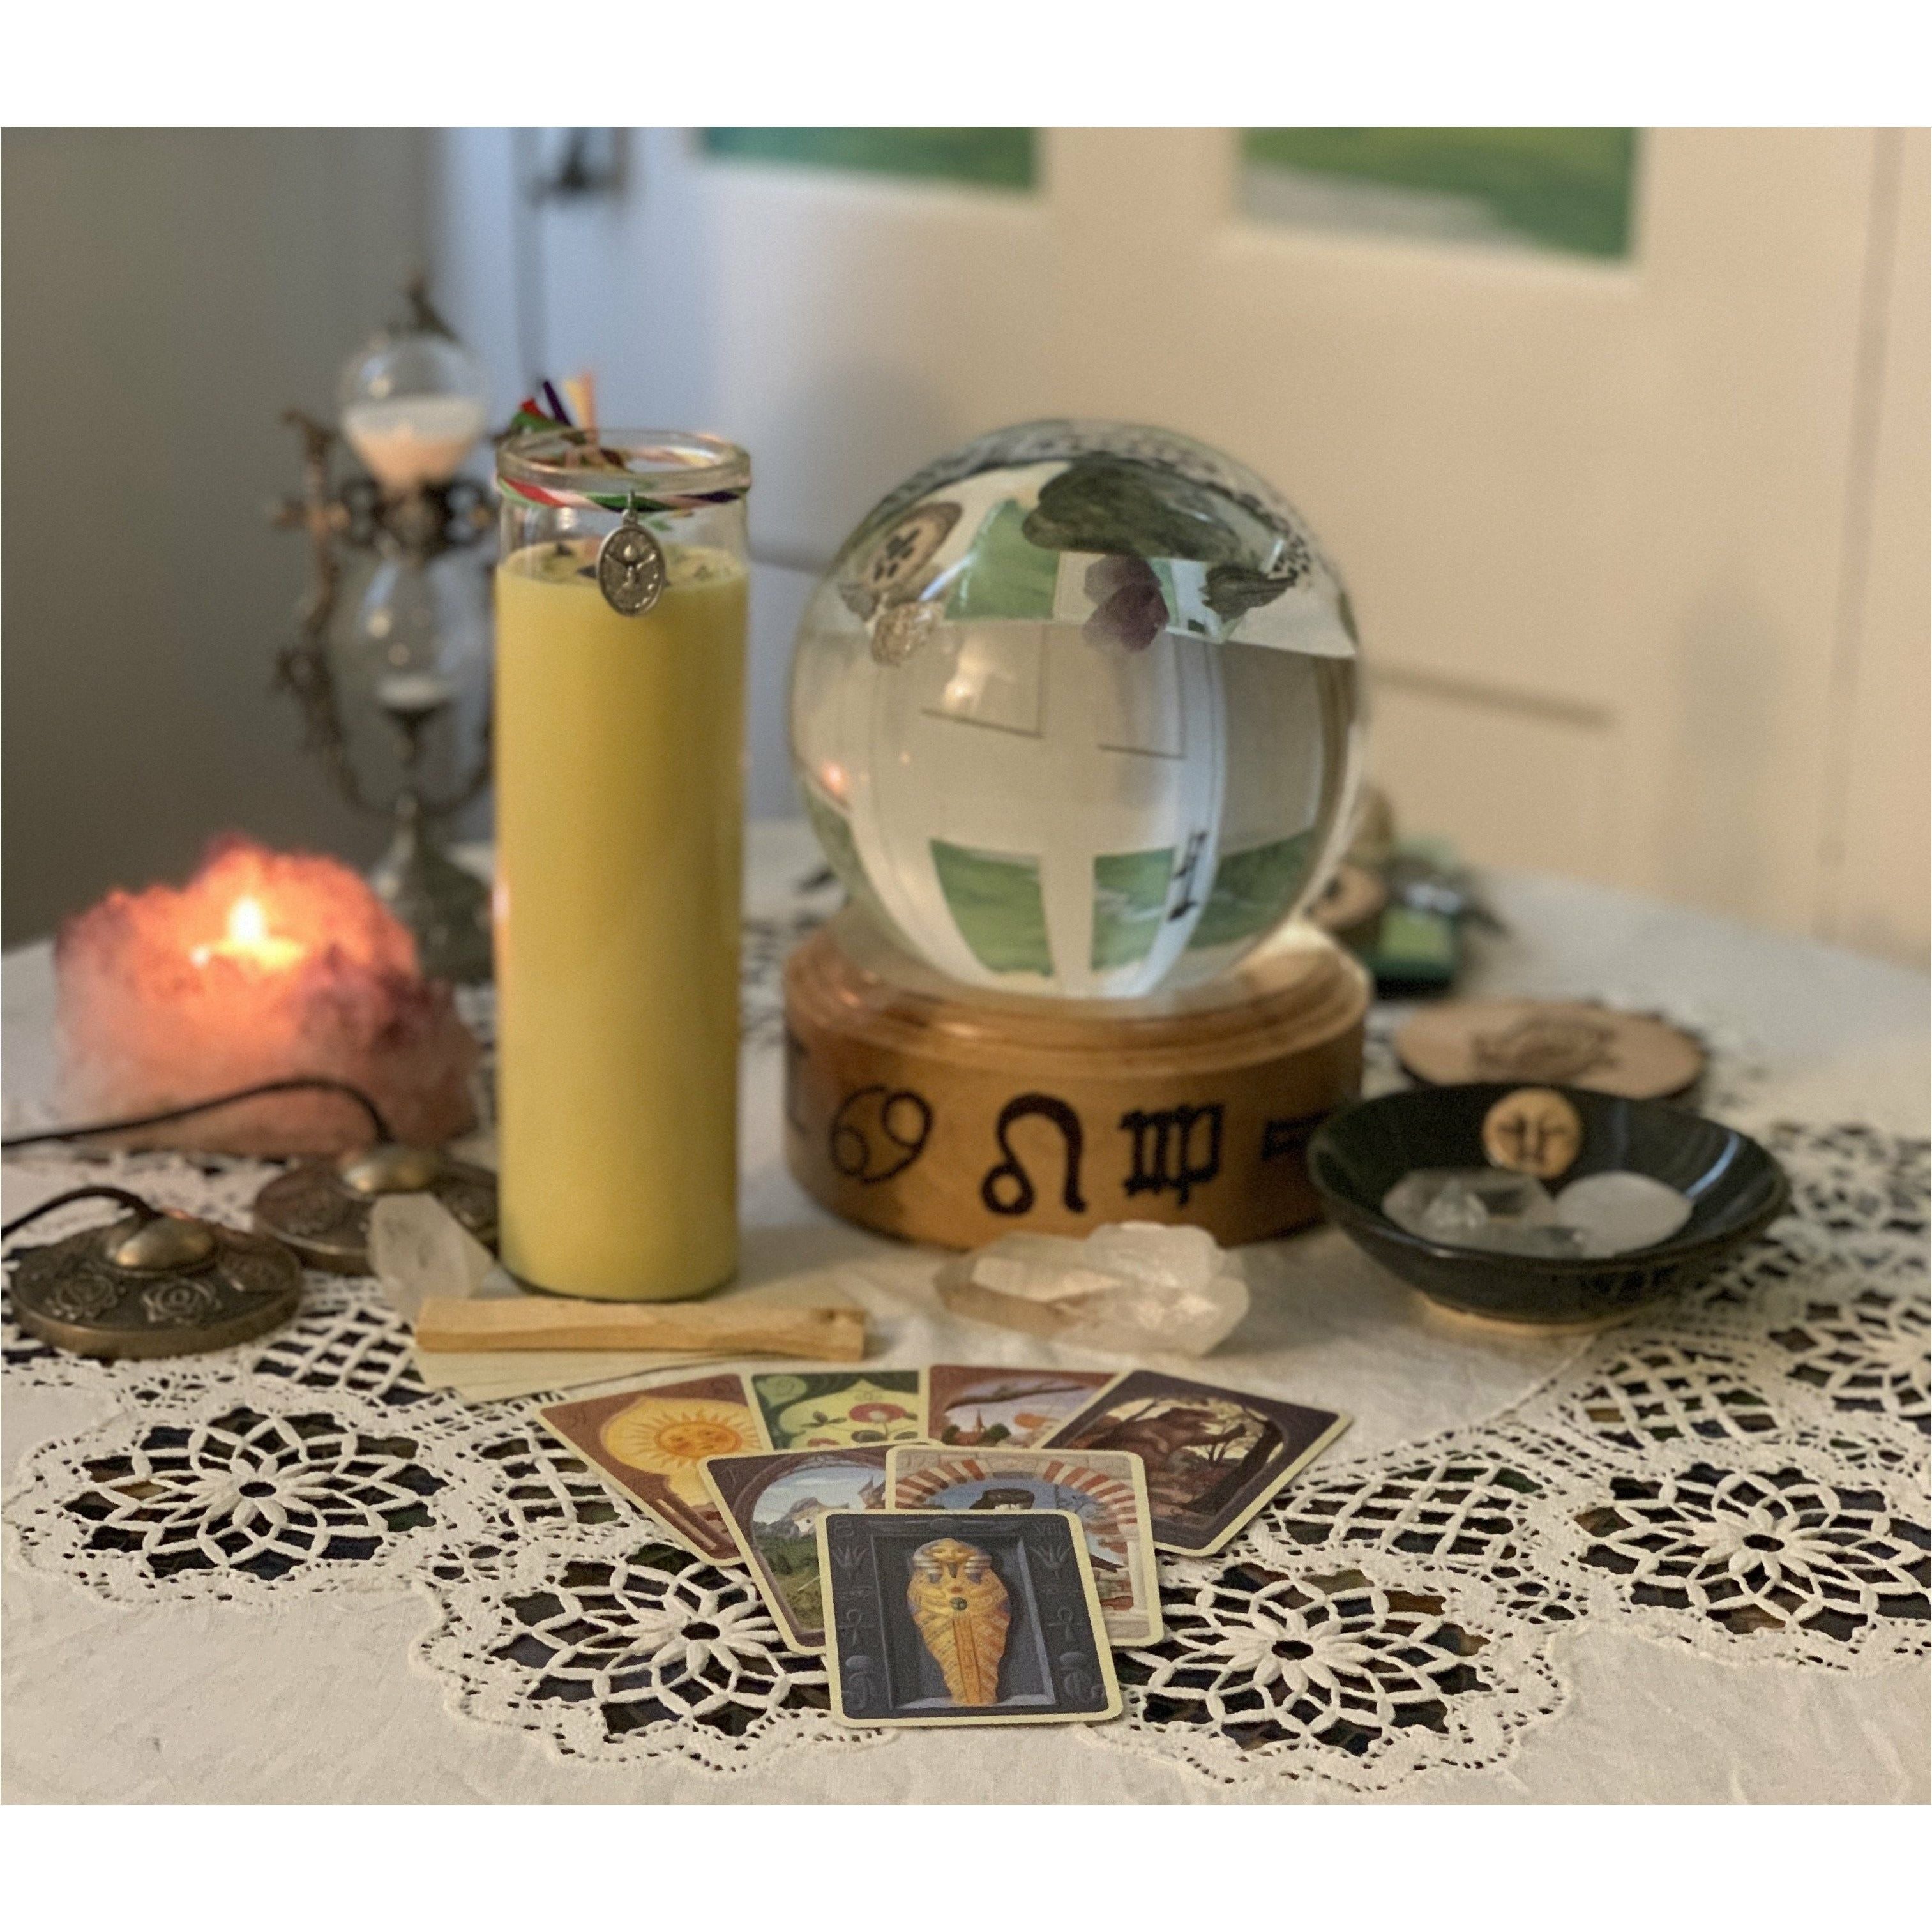 30 Minute Intuitive Blend Prayer Candle with a Reading - Mystic Pines Candle Co. 